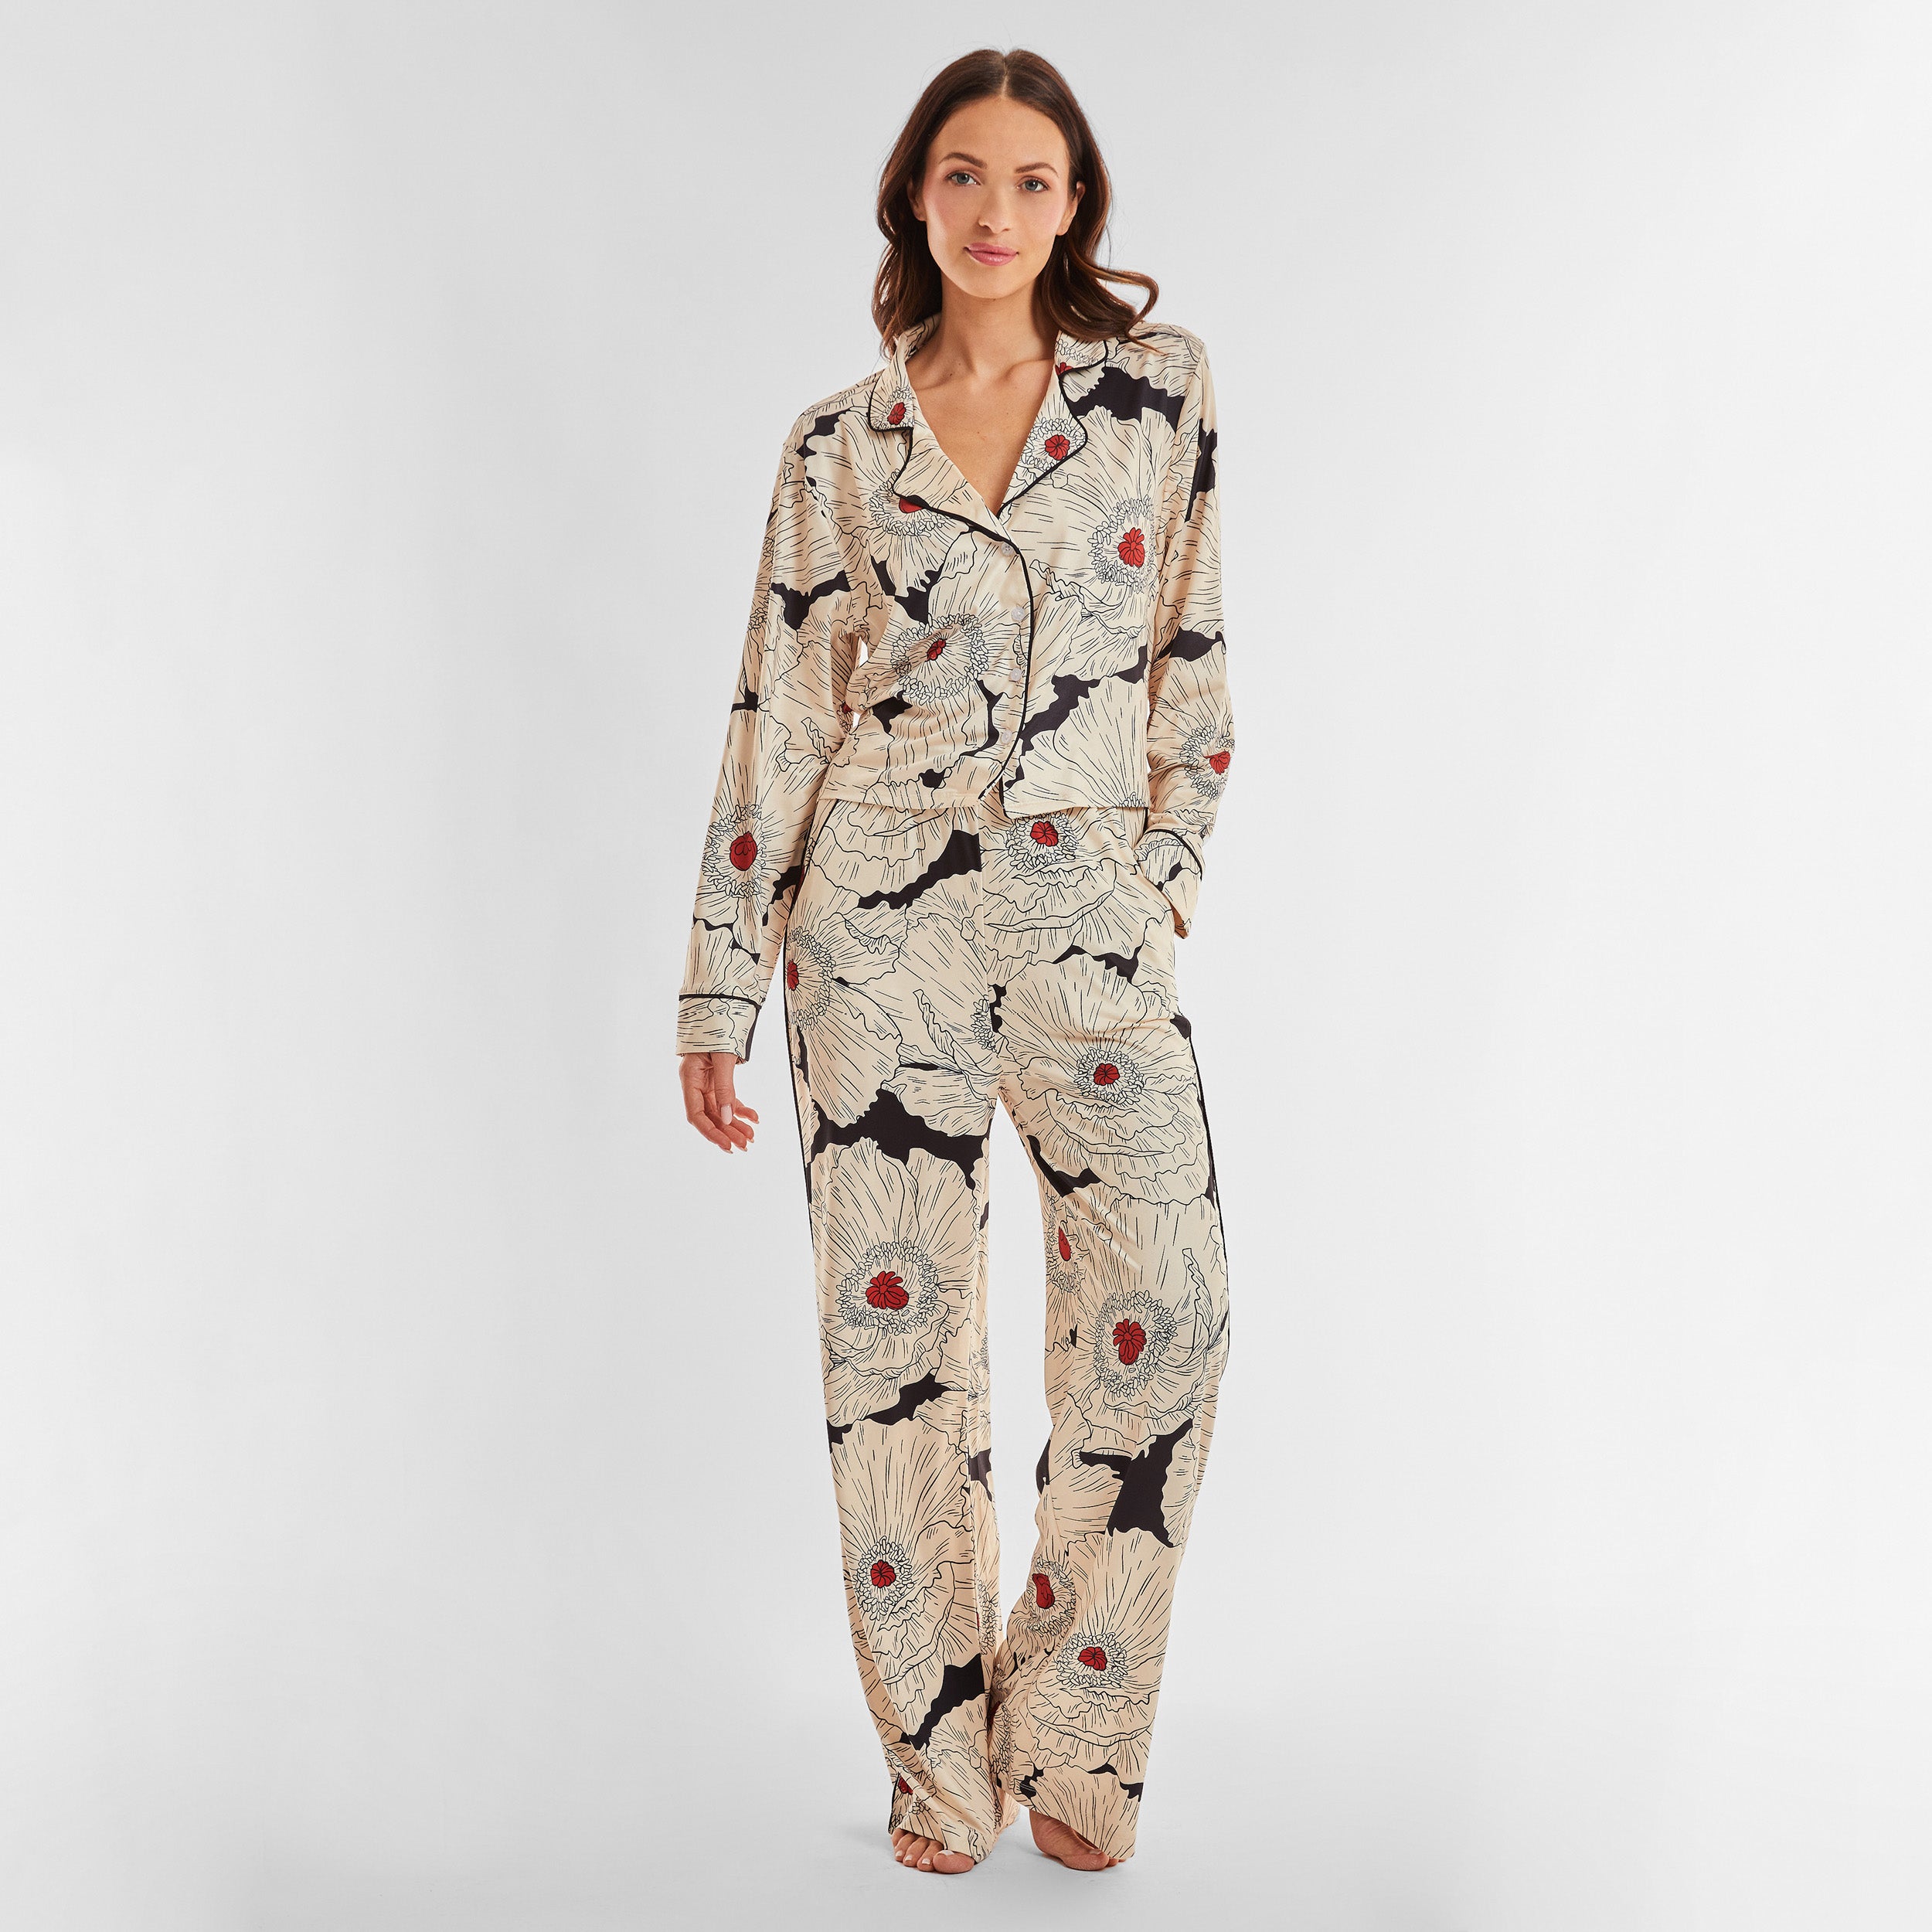 Full view of woman wearing breathable, relaxed and buttery smooth pajama pant featuring high-waist cut, side pockets, front tie and stunning Poppy floral print.